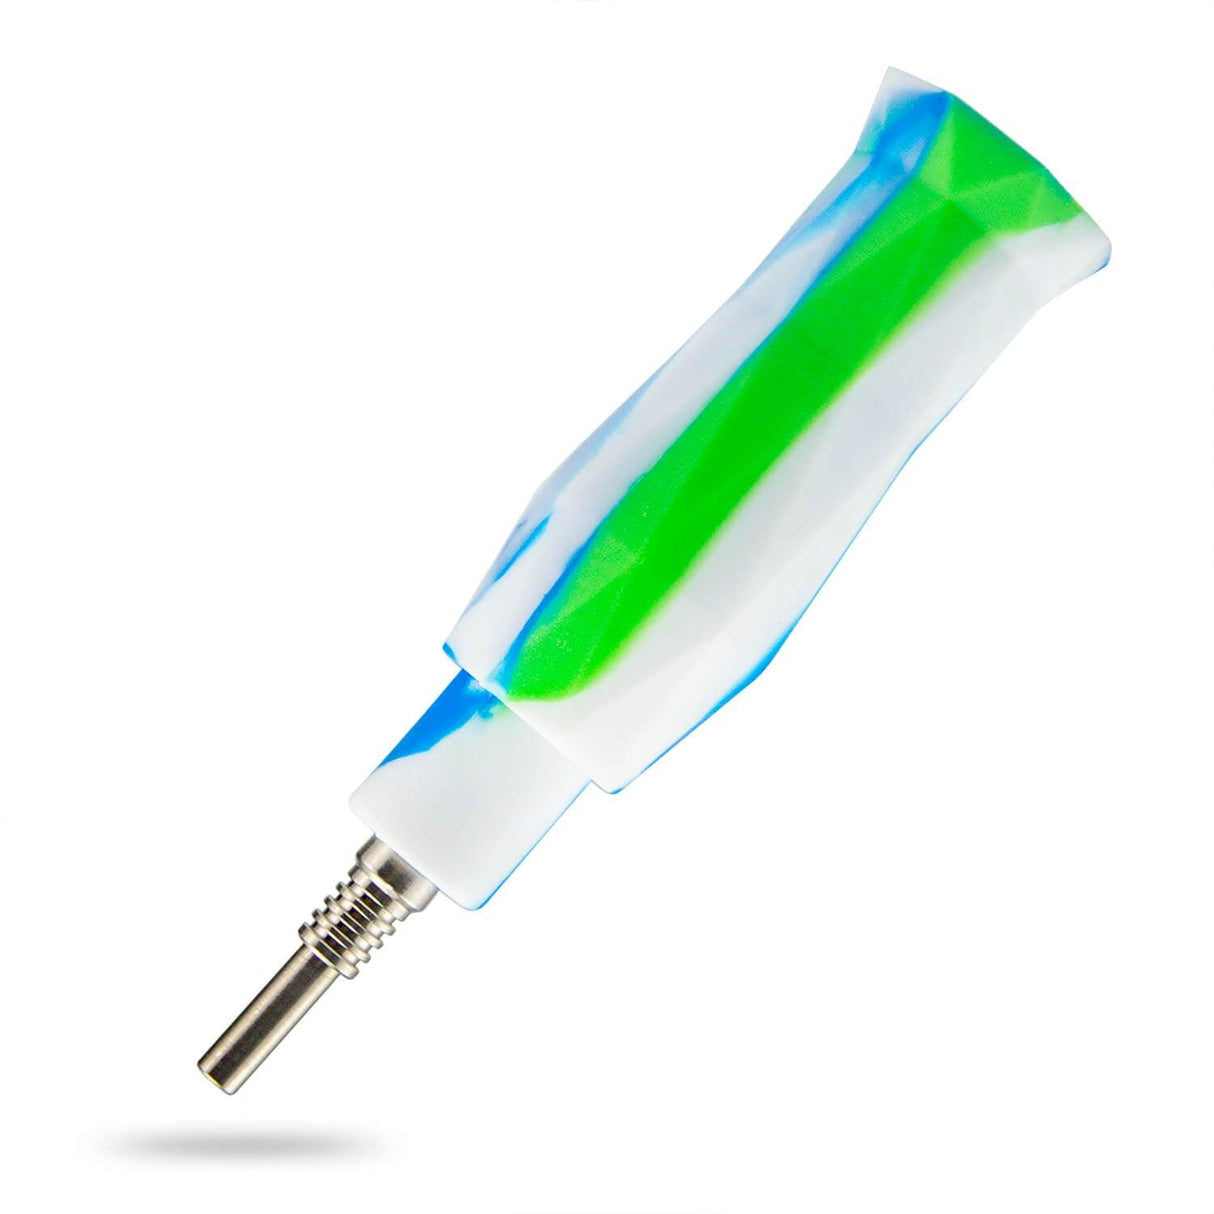 PILOT DIARY Mini Nectar Collector Kit with Green & Blue Accents - Angled View